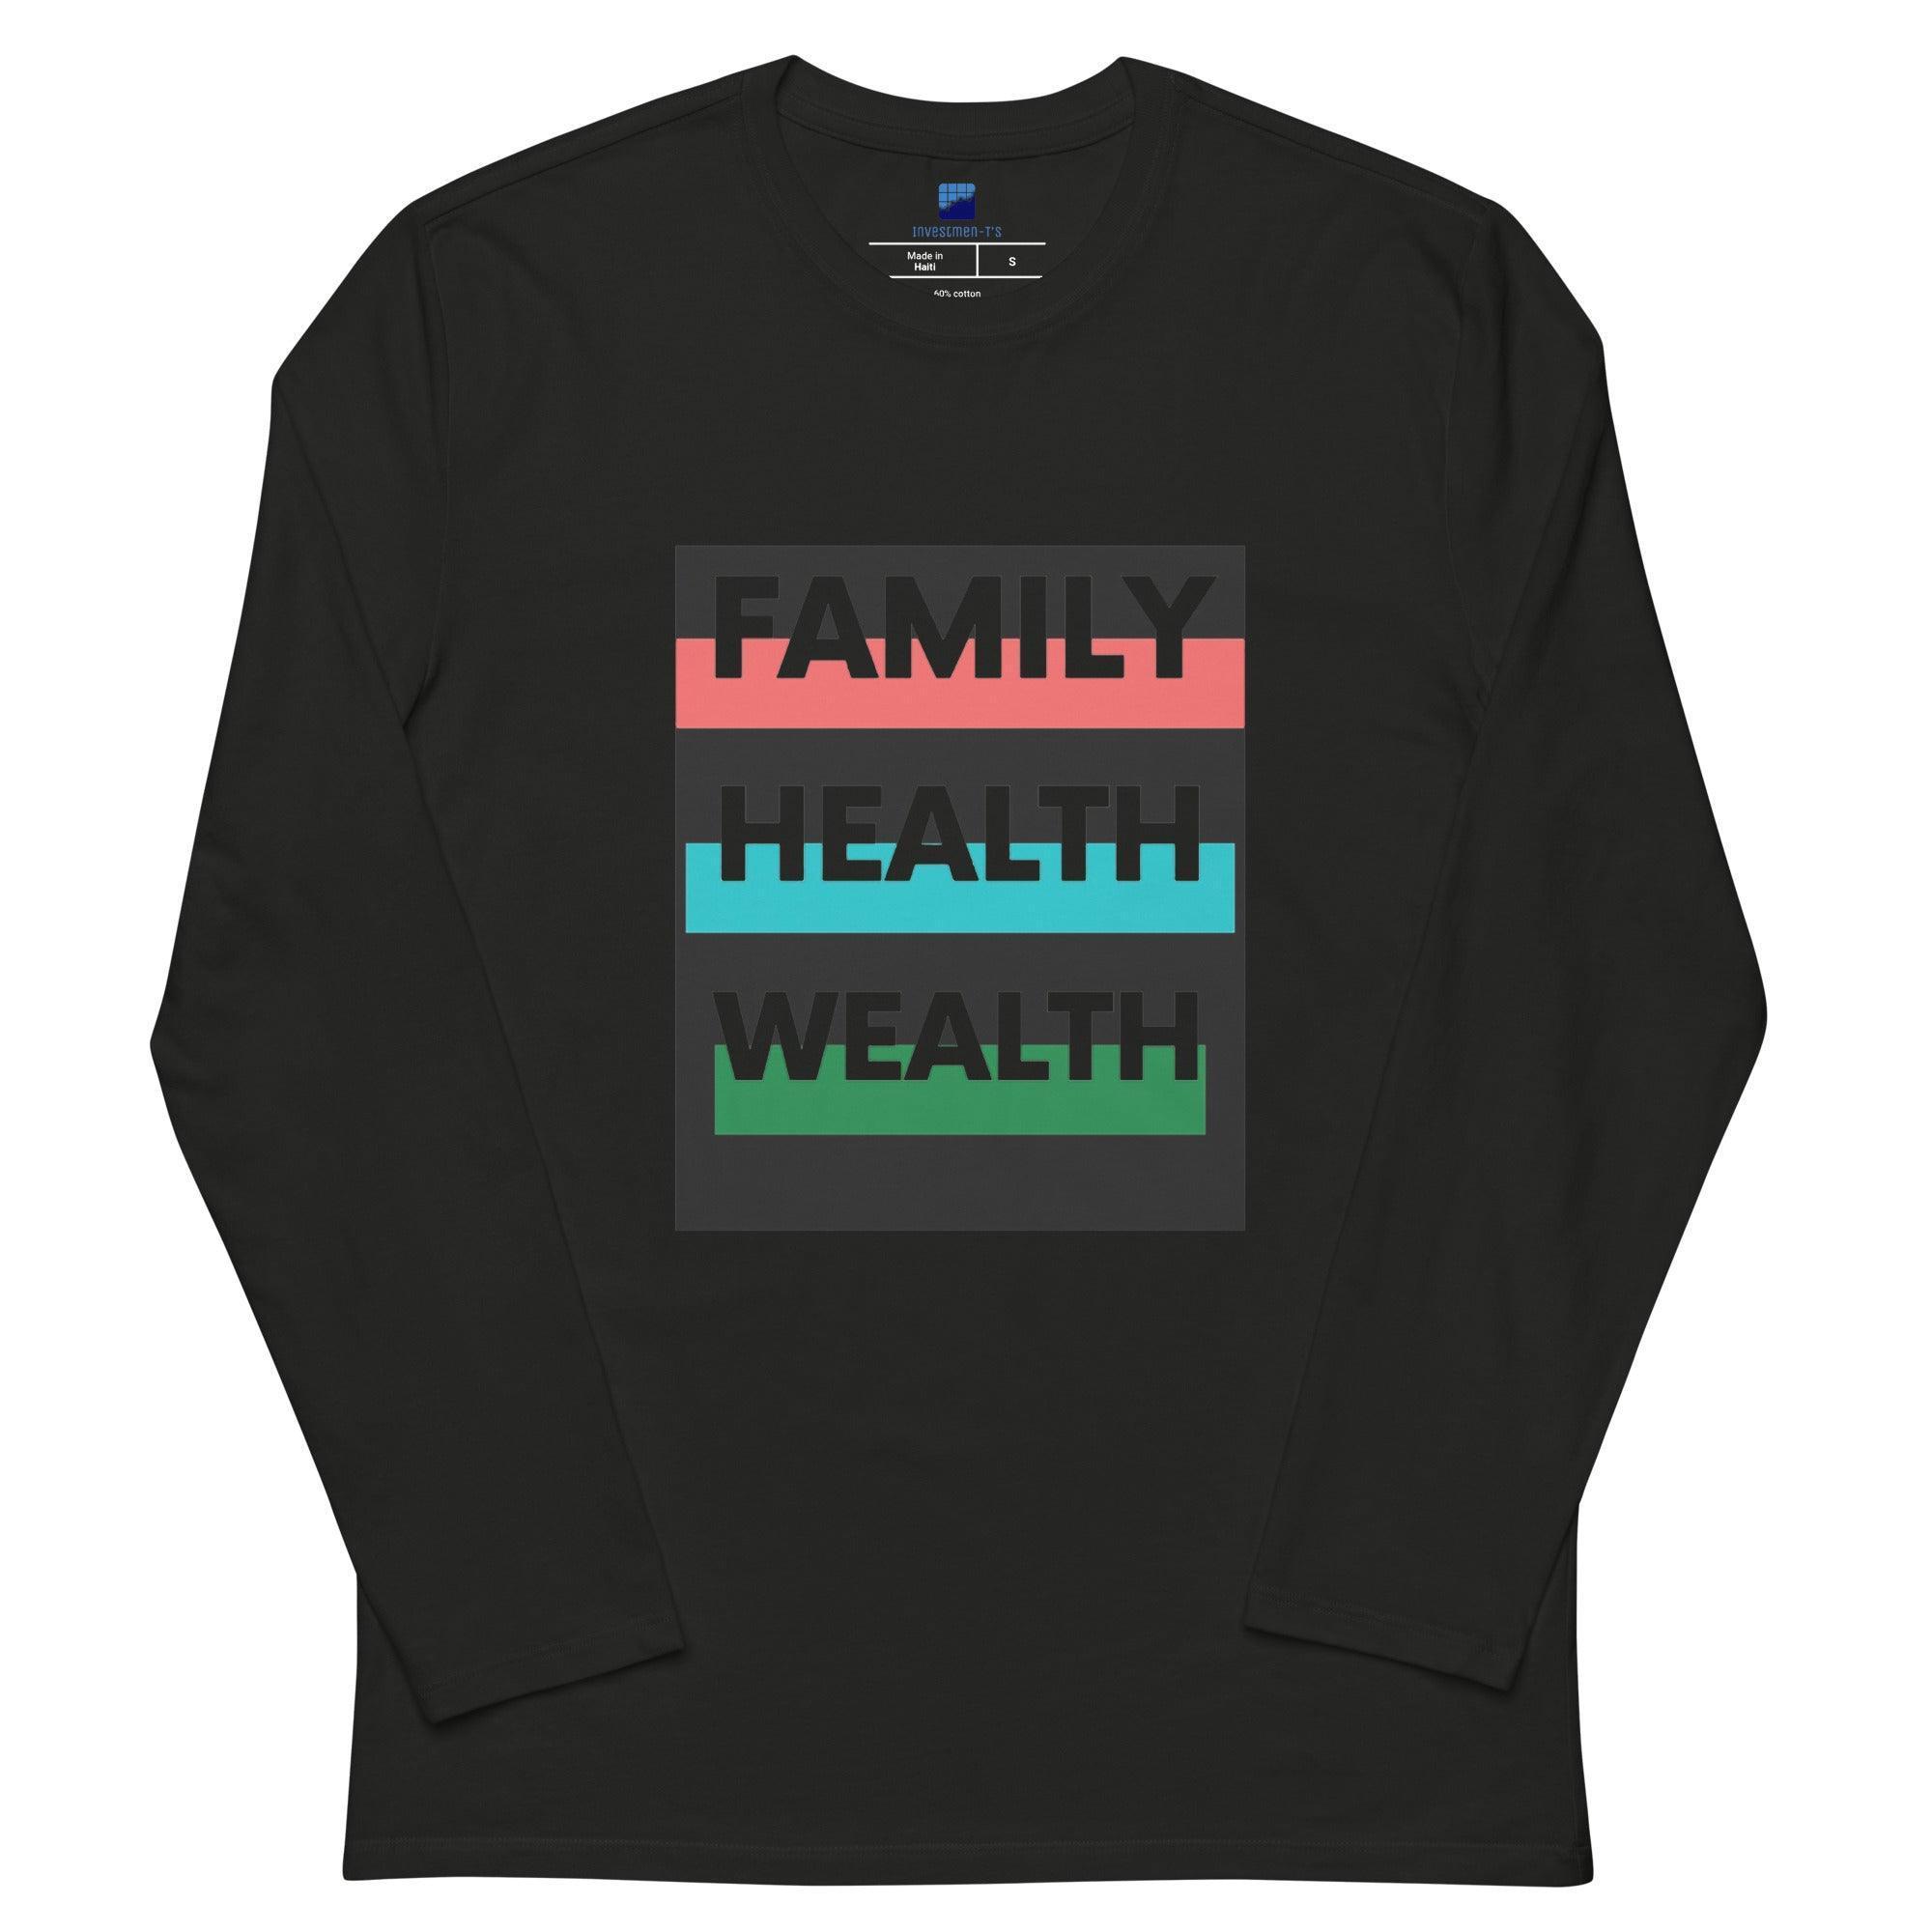 Family, Health, Wealth Long Sleeve T-Shirt - InvestmenTees